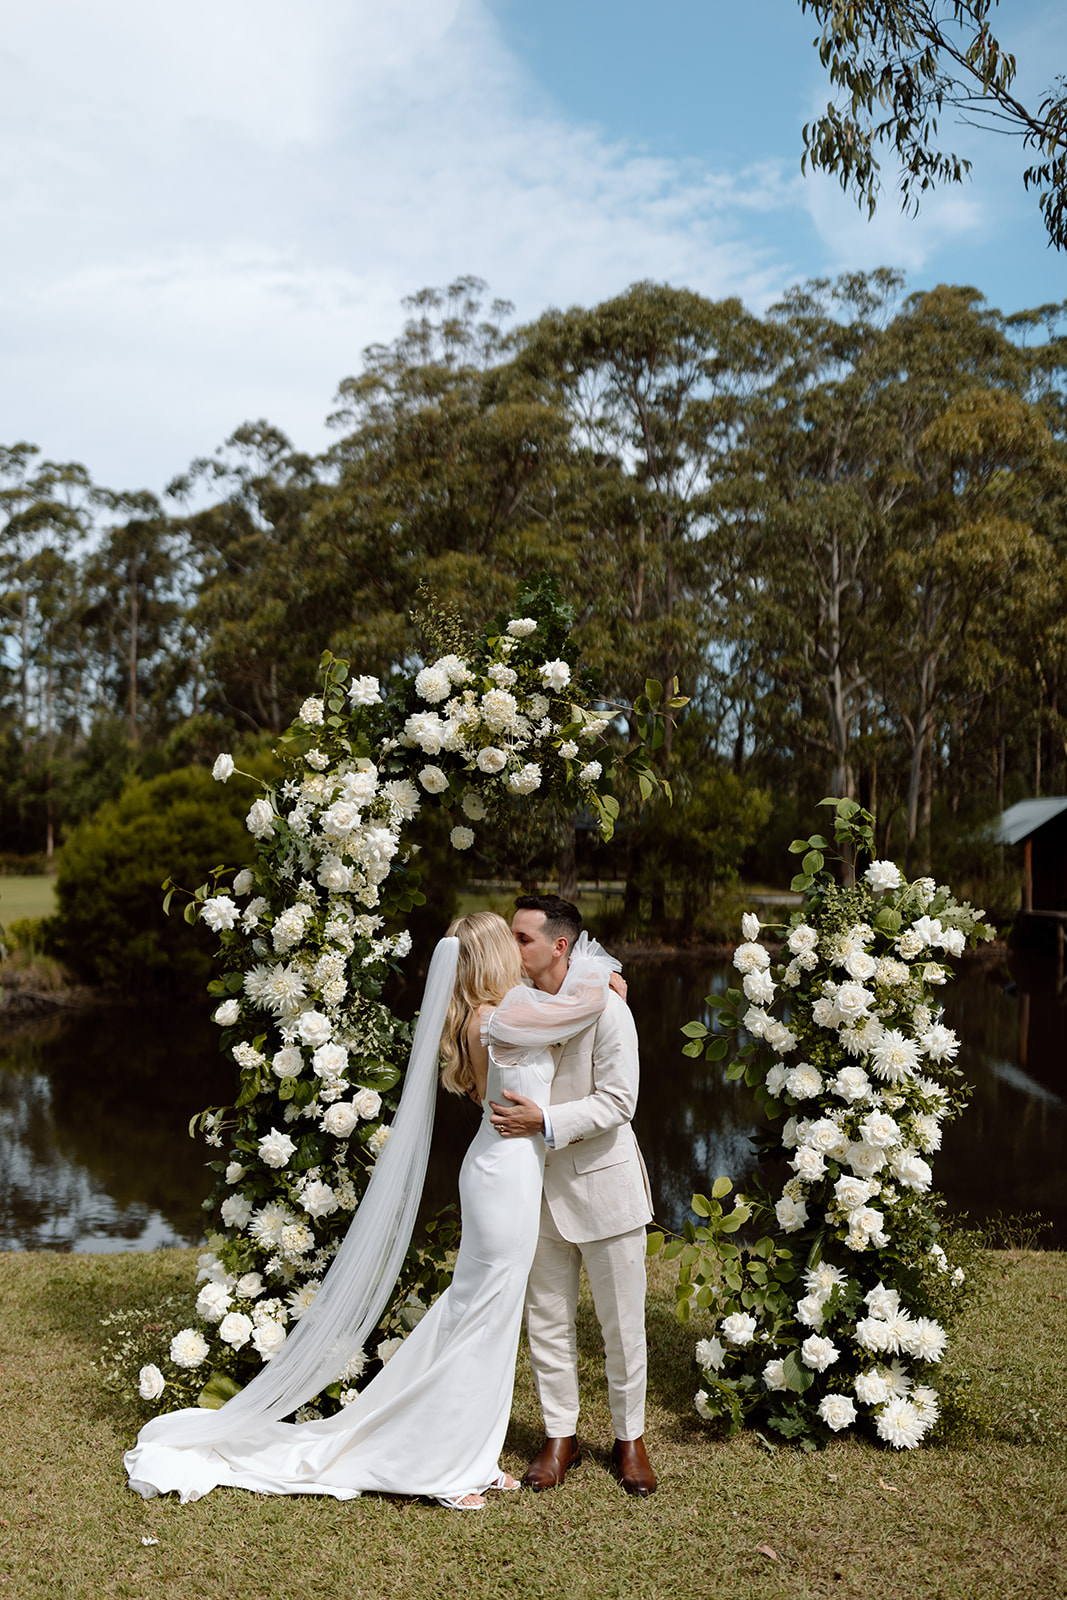 Wedding ceremony in the South Coast Bawley Vale Estate